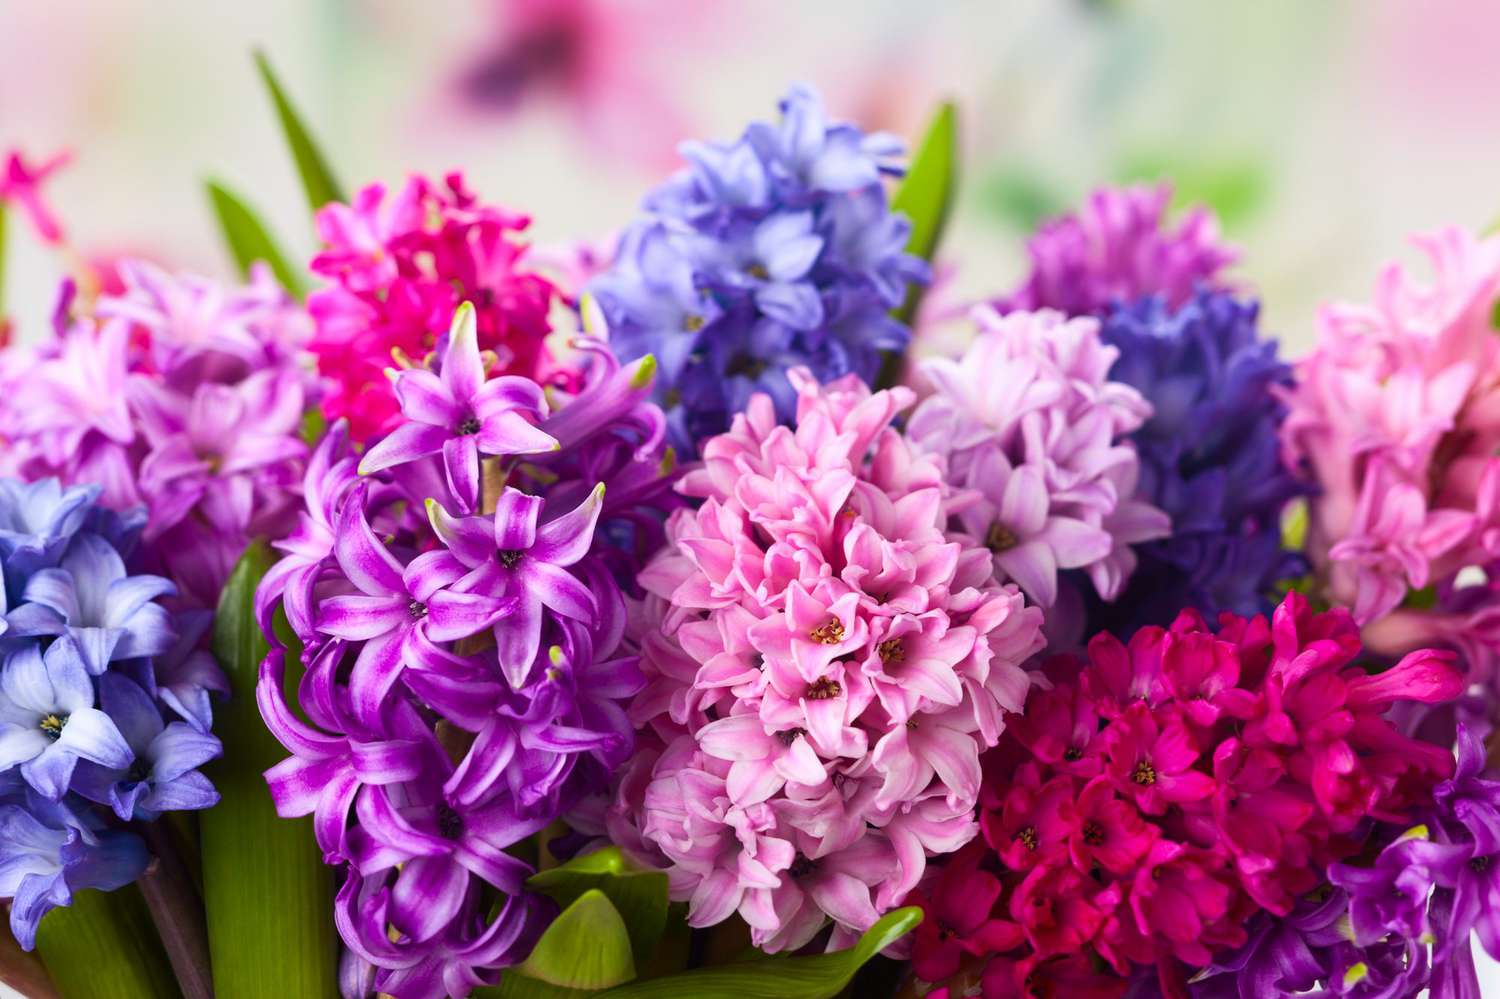 You got: Gentle Hyacinth! What Spring Flower Are You? 🌷 Eat a Spring-Colored Buffet to Find Out